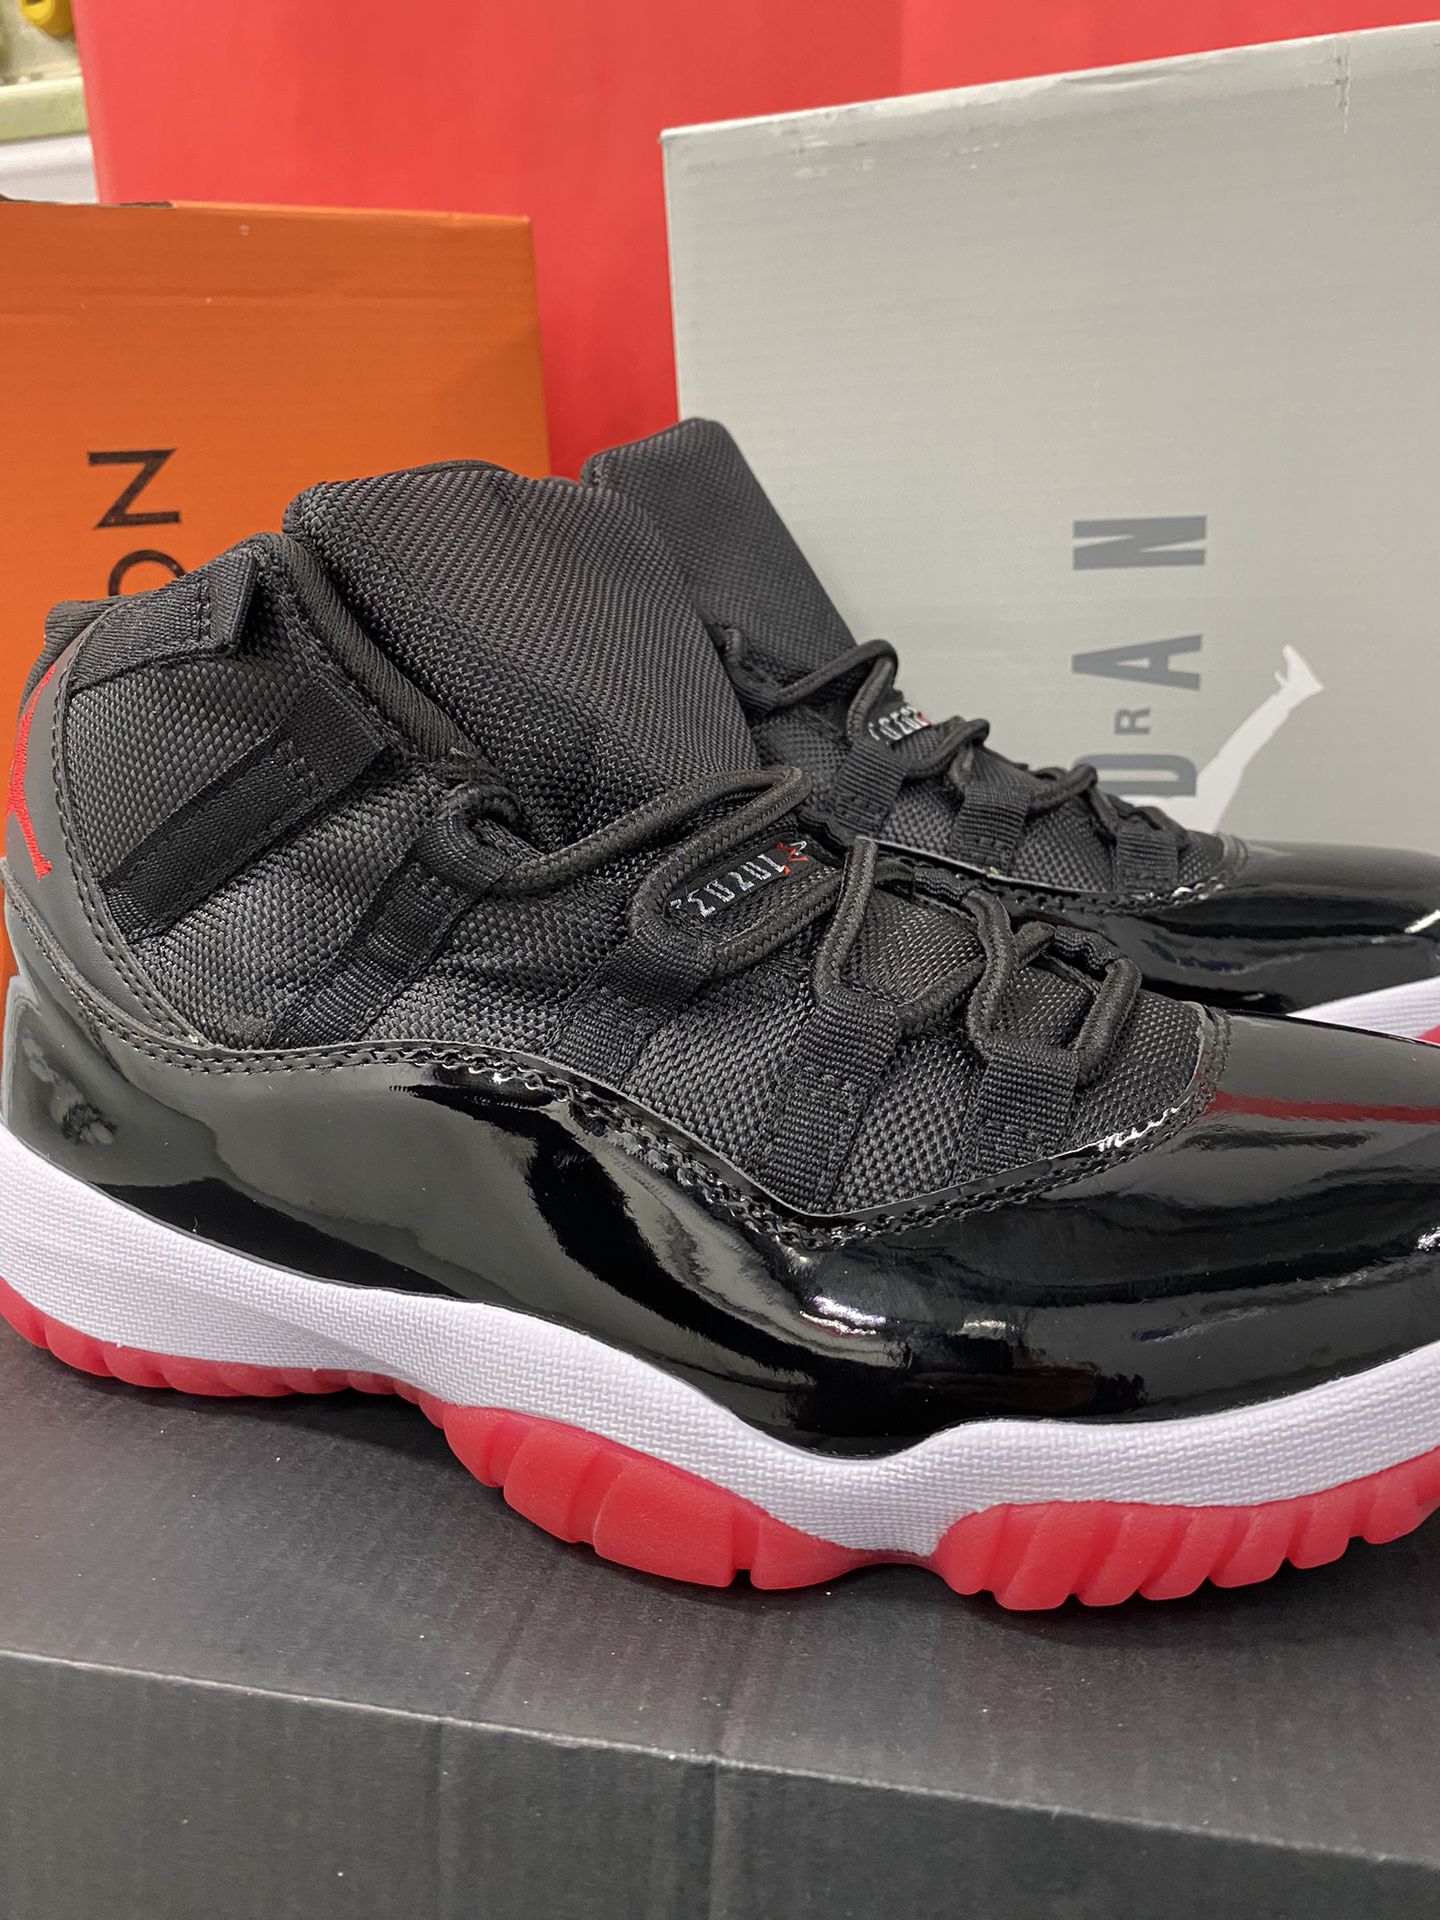 Jordan 11 More Style Available 